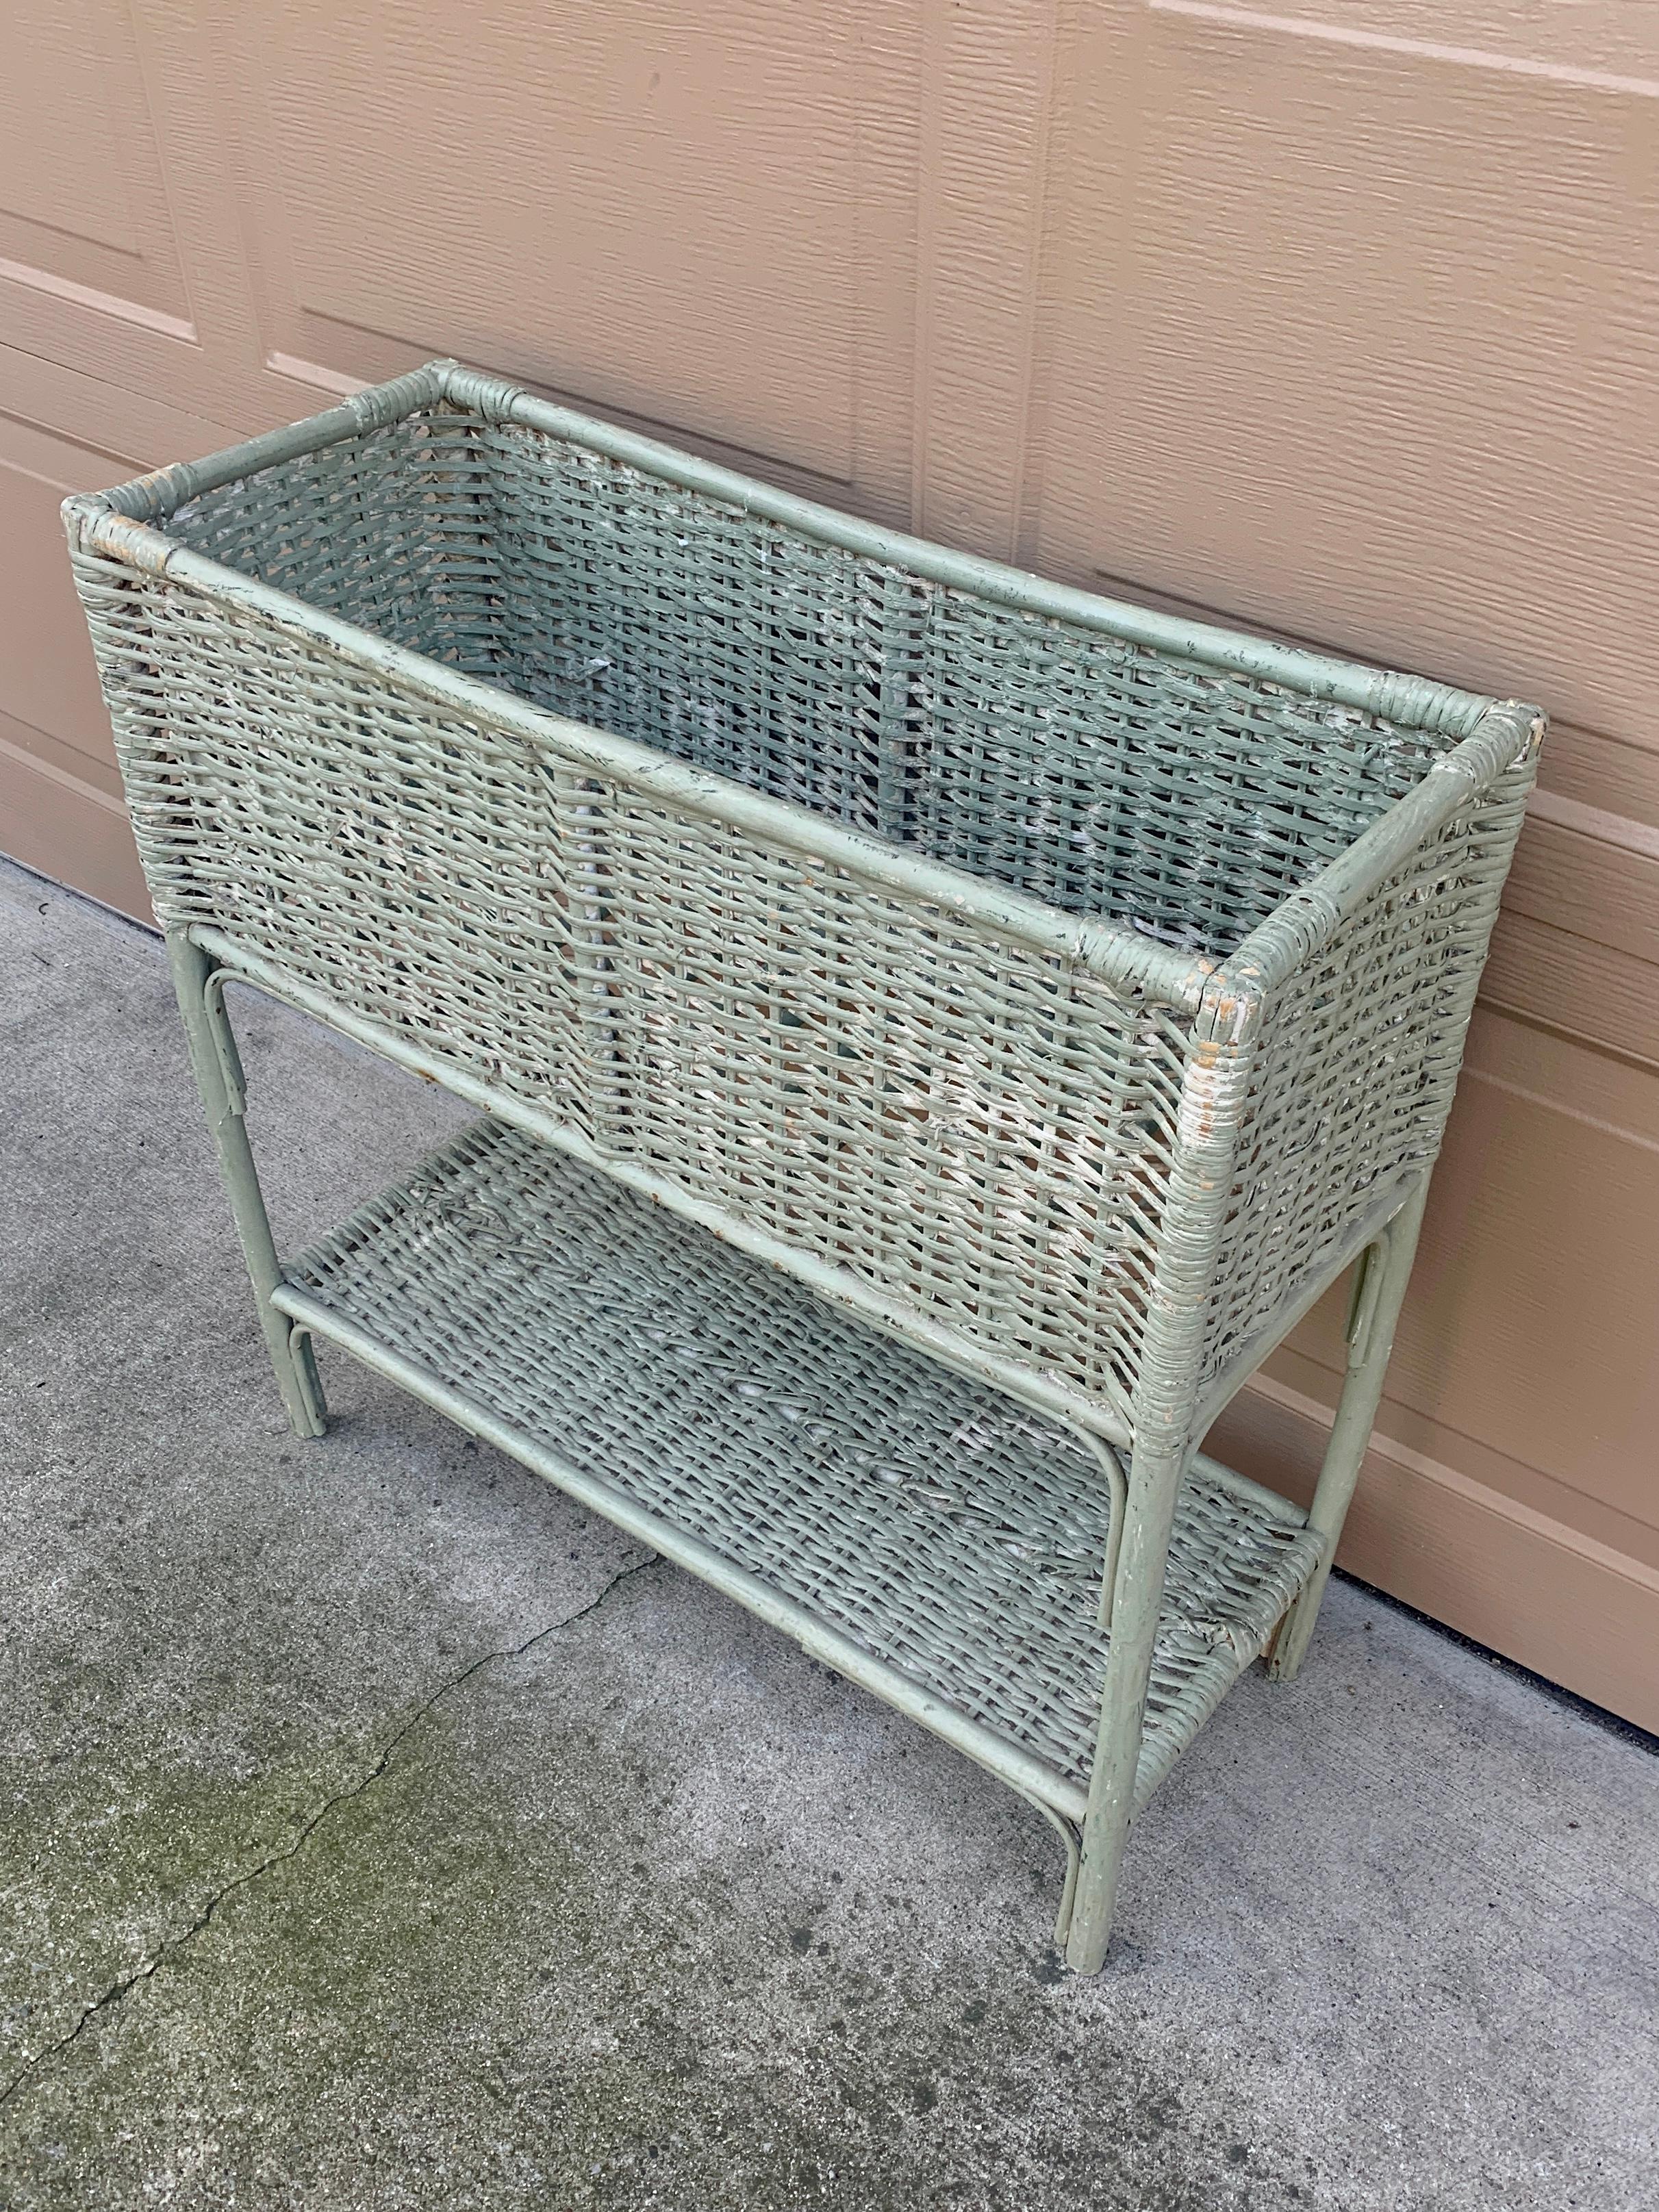 A gorgeous Victorian light green wicker plant stand with lower shelf. This piece would be charming indoors or on a porch, patio, or deck. 

USA, Late 19th Century

Measures: 29.25